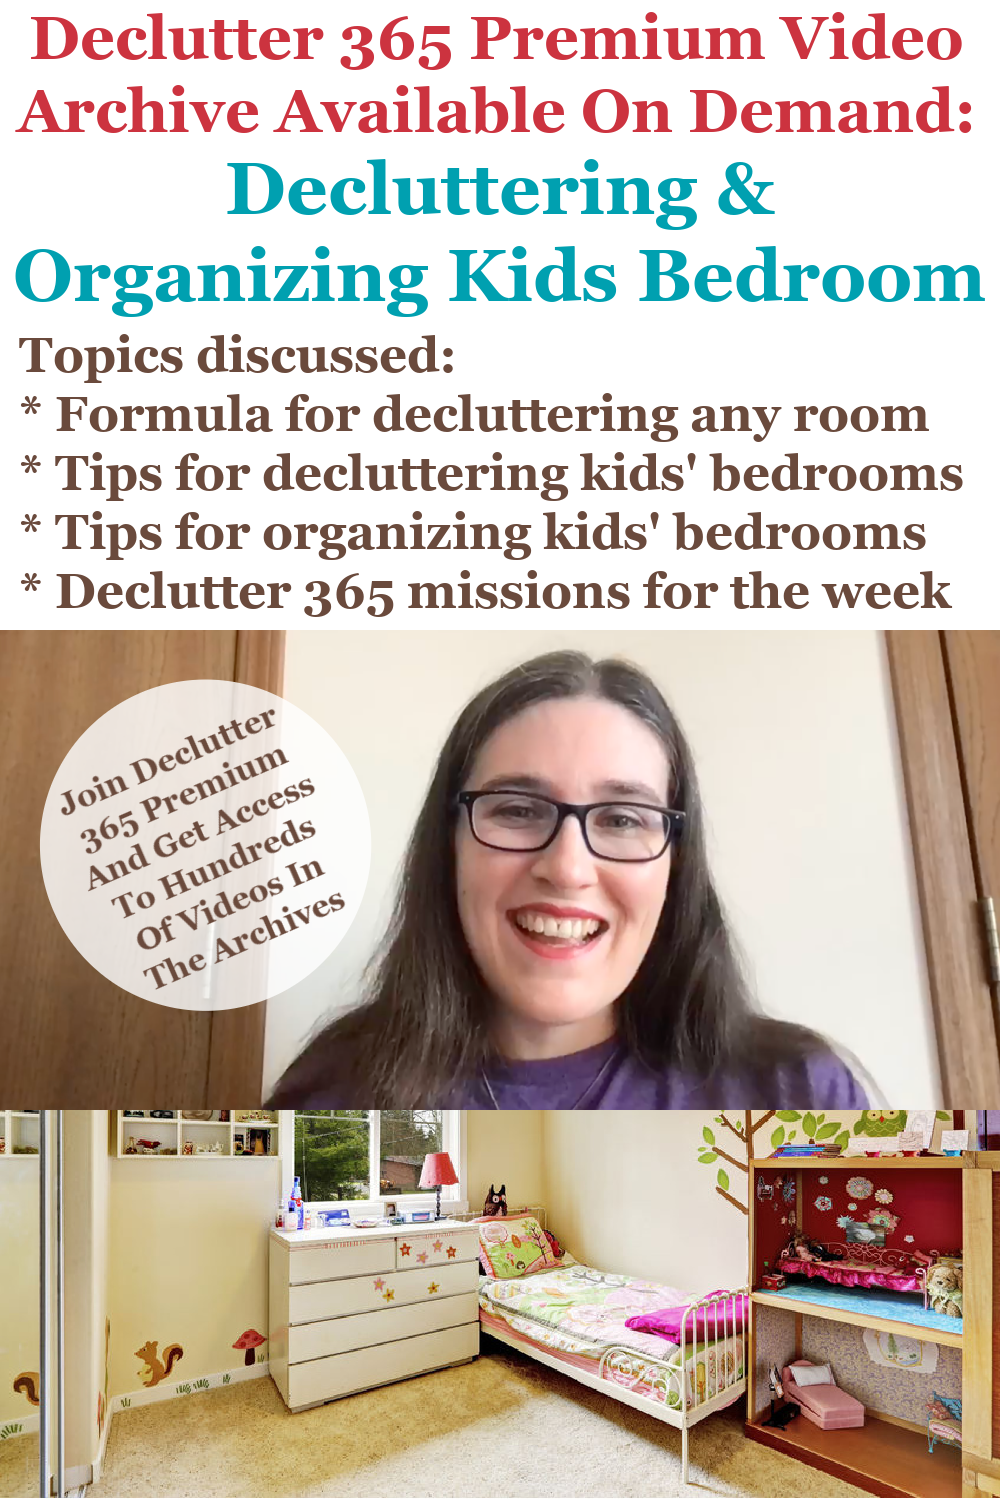 Decluttering Kids' Artwork: How to Display, Store and Trash It